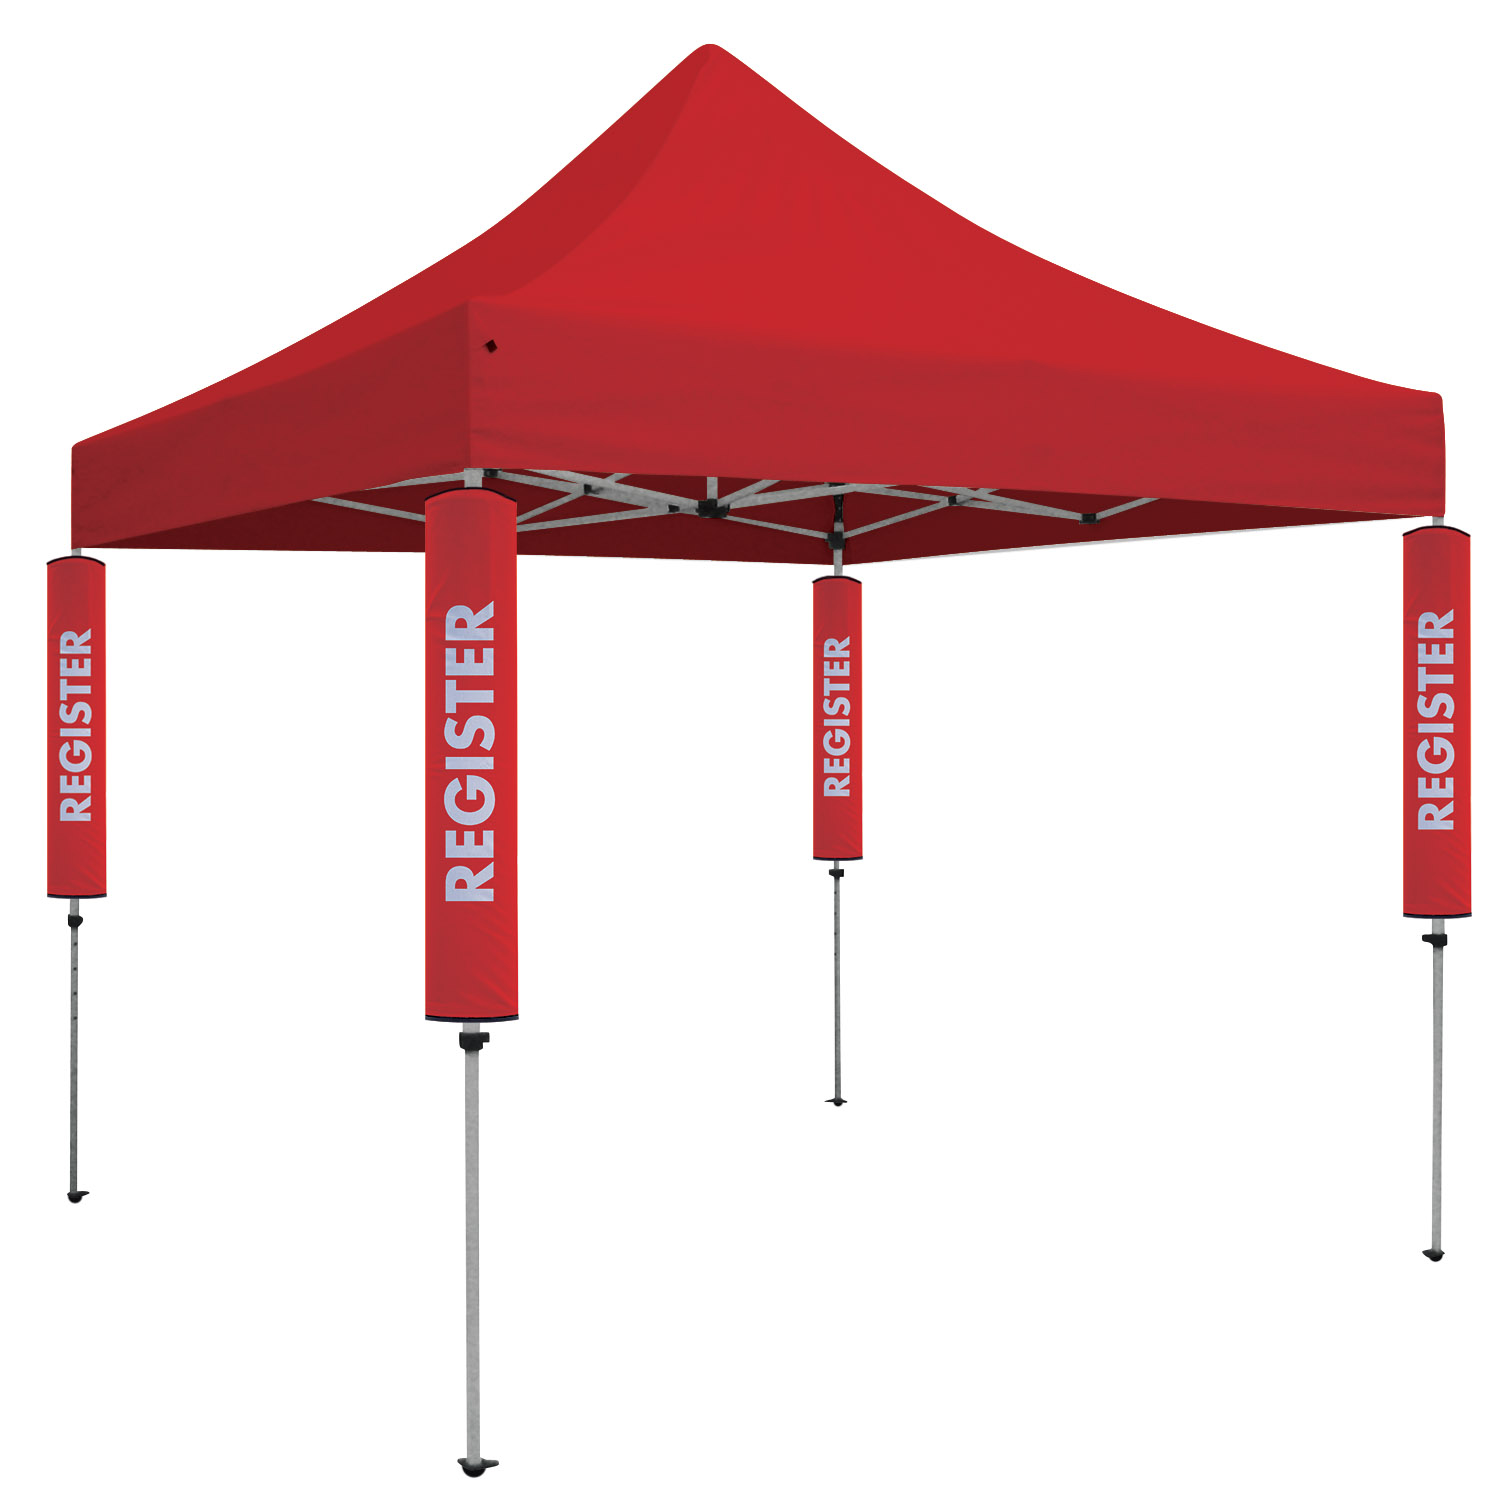 red event tent with fabric signs that read 